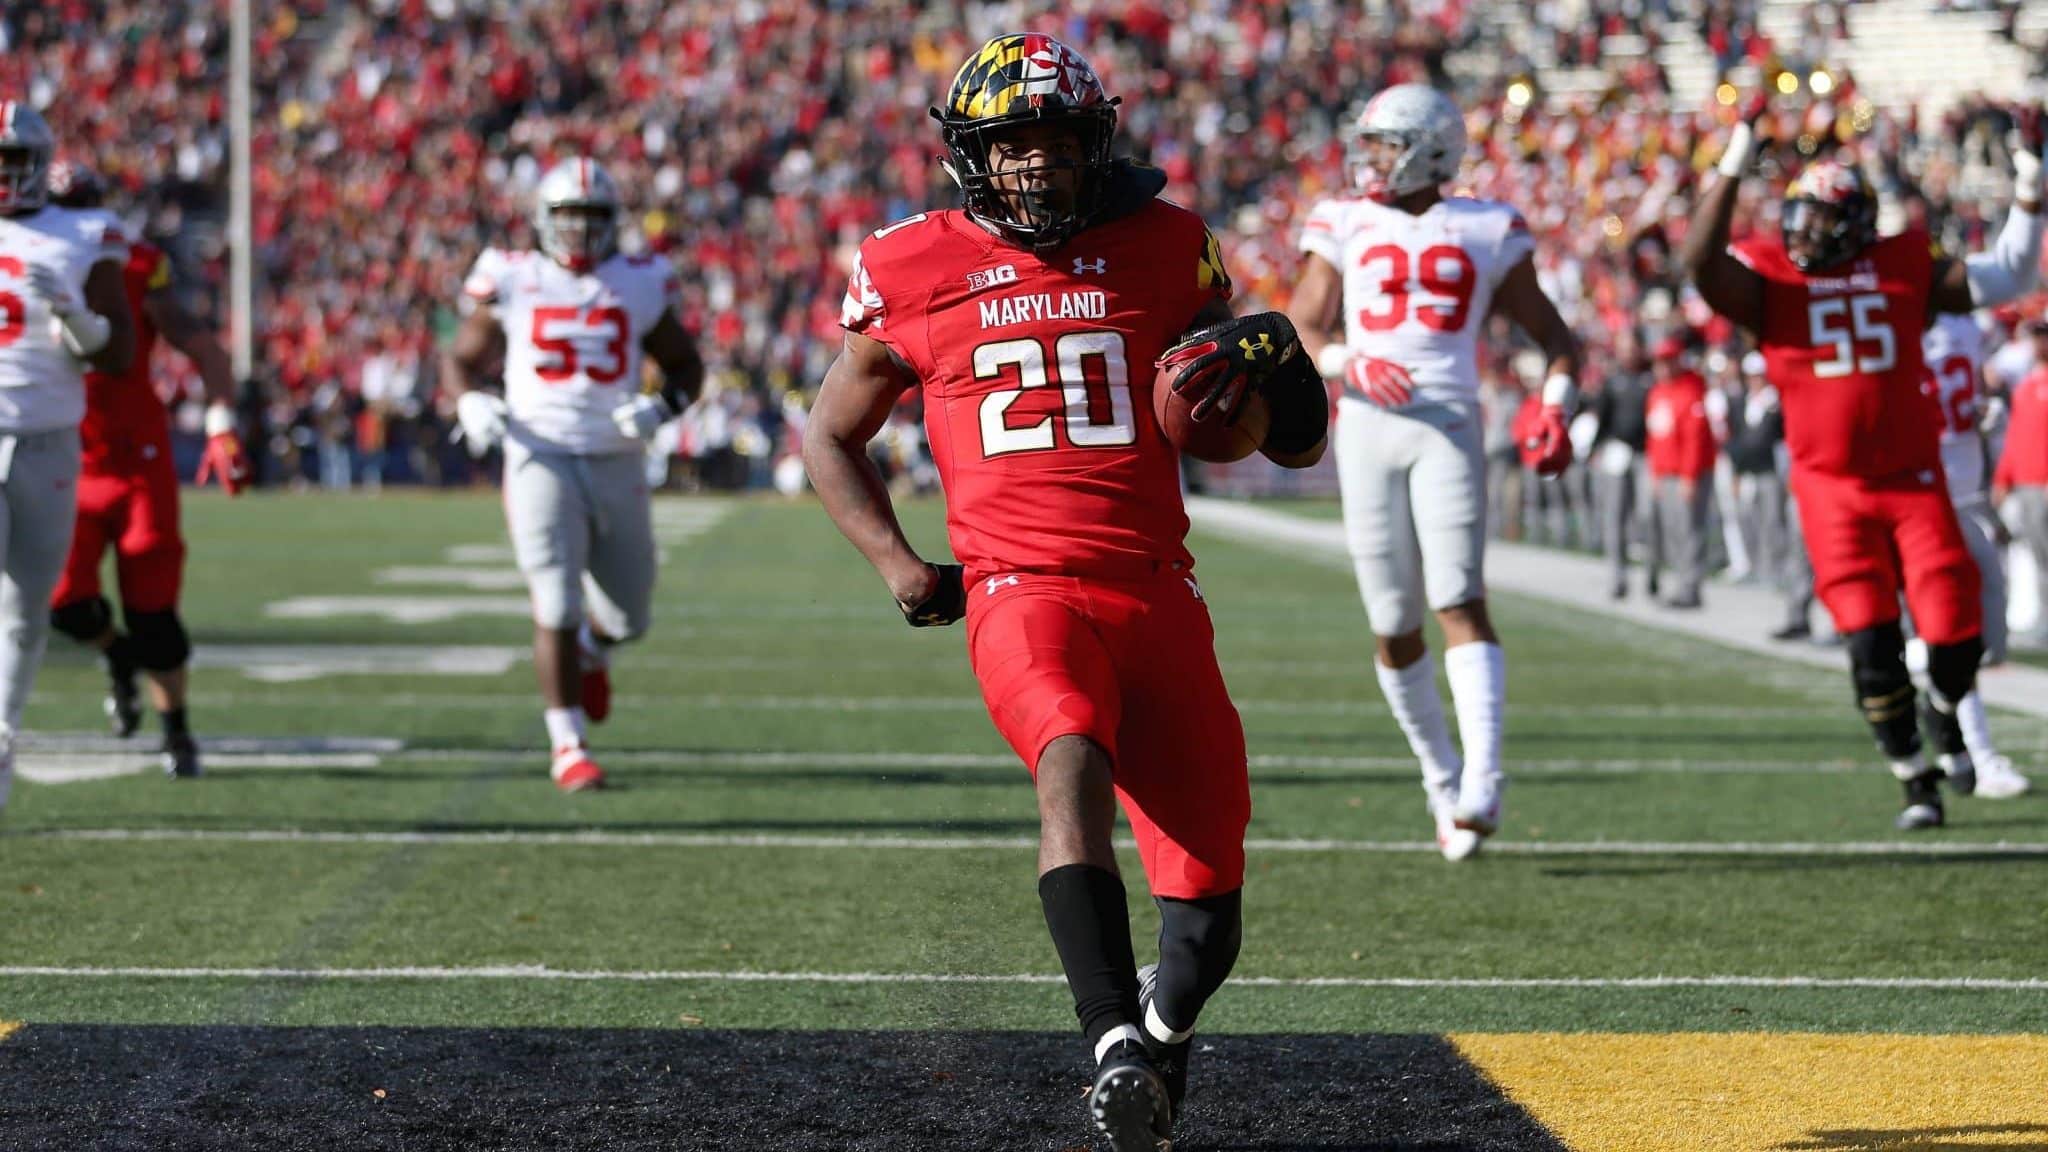 COLLEGE PARK, MD - NOVEMBER 17: Javon Leake #20 of the Maryland Terrapins scores a touchdown against the Ohio State Buckeyes during the first half at Capital One Field on November 17, 2018 in College Park, Maryland.